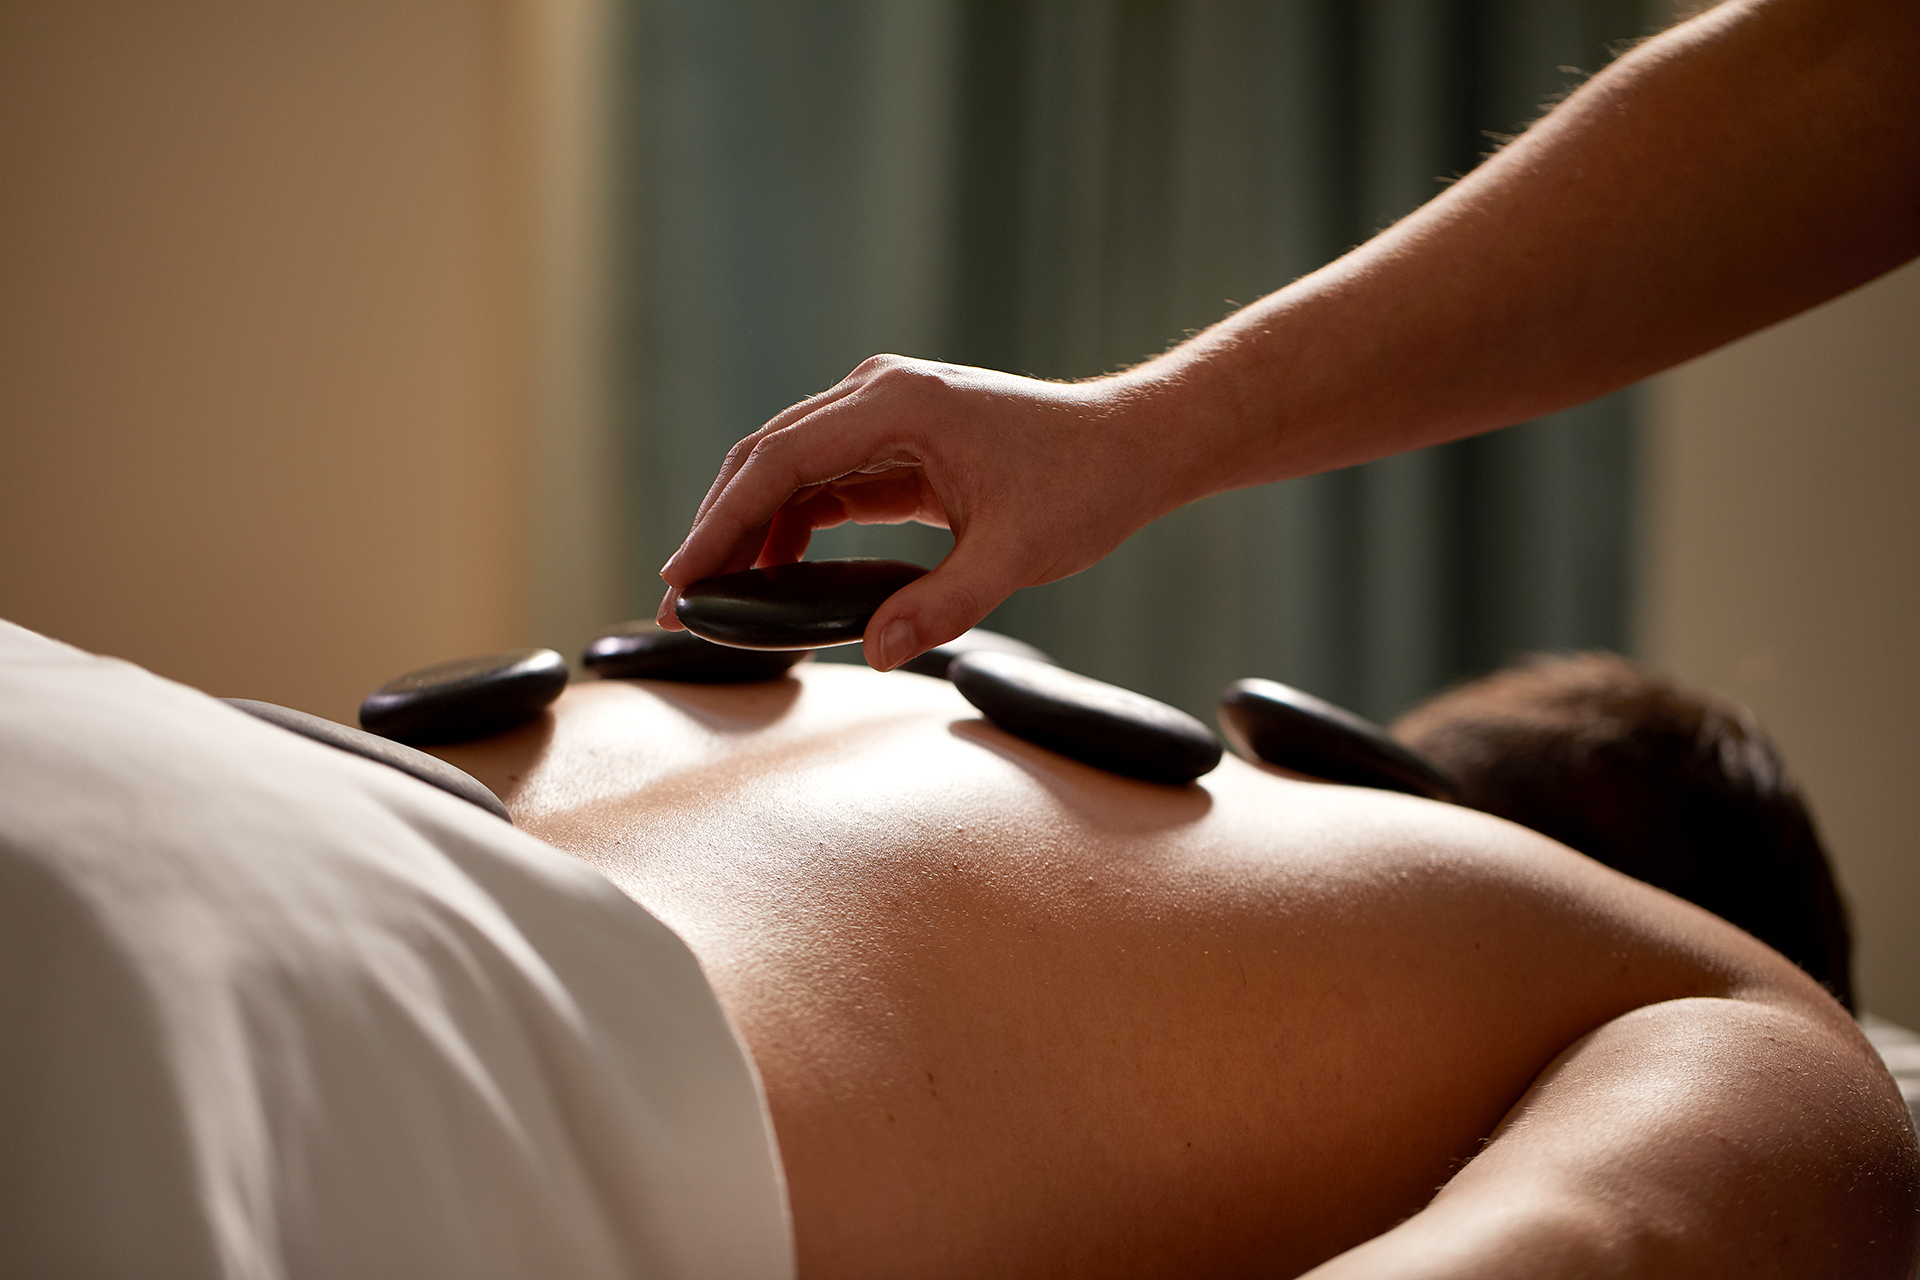 National-University-of-Health-Sciences-1 Top 10 Best Massage Therapy Schools in the USA